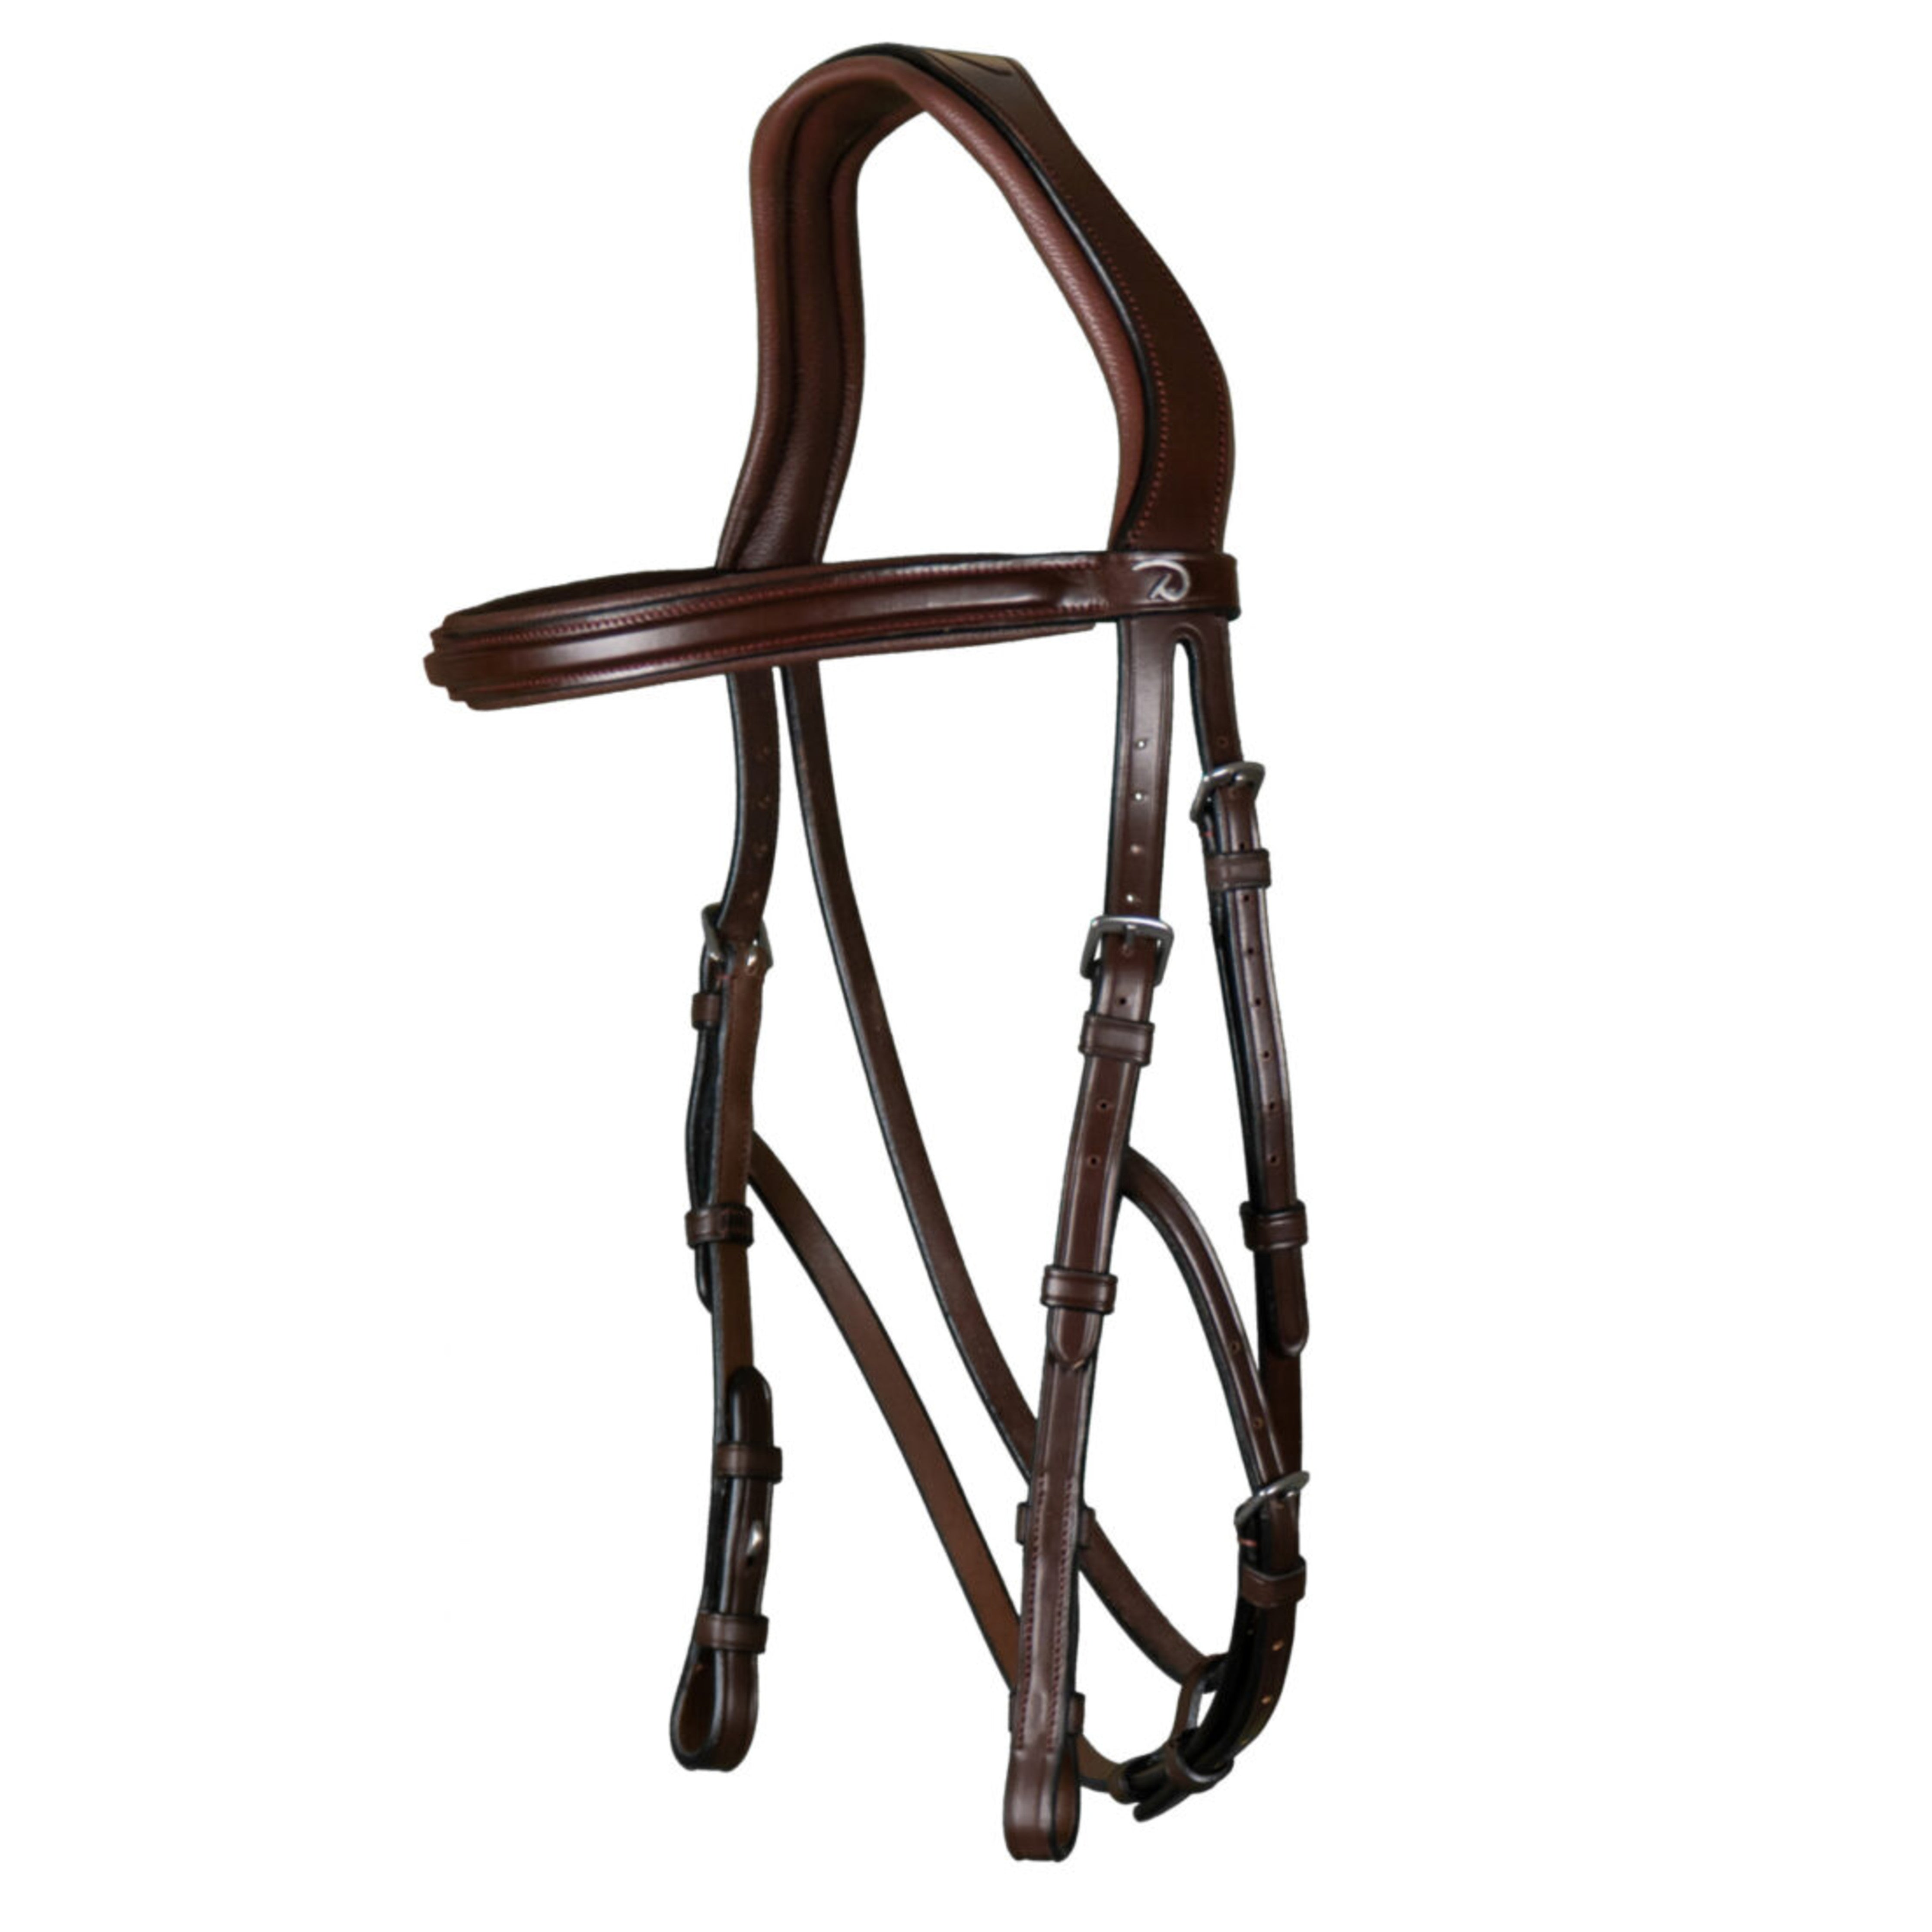 Dyon New English Hackamore Bridle Silver/Full